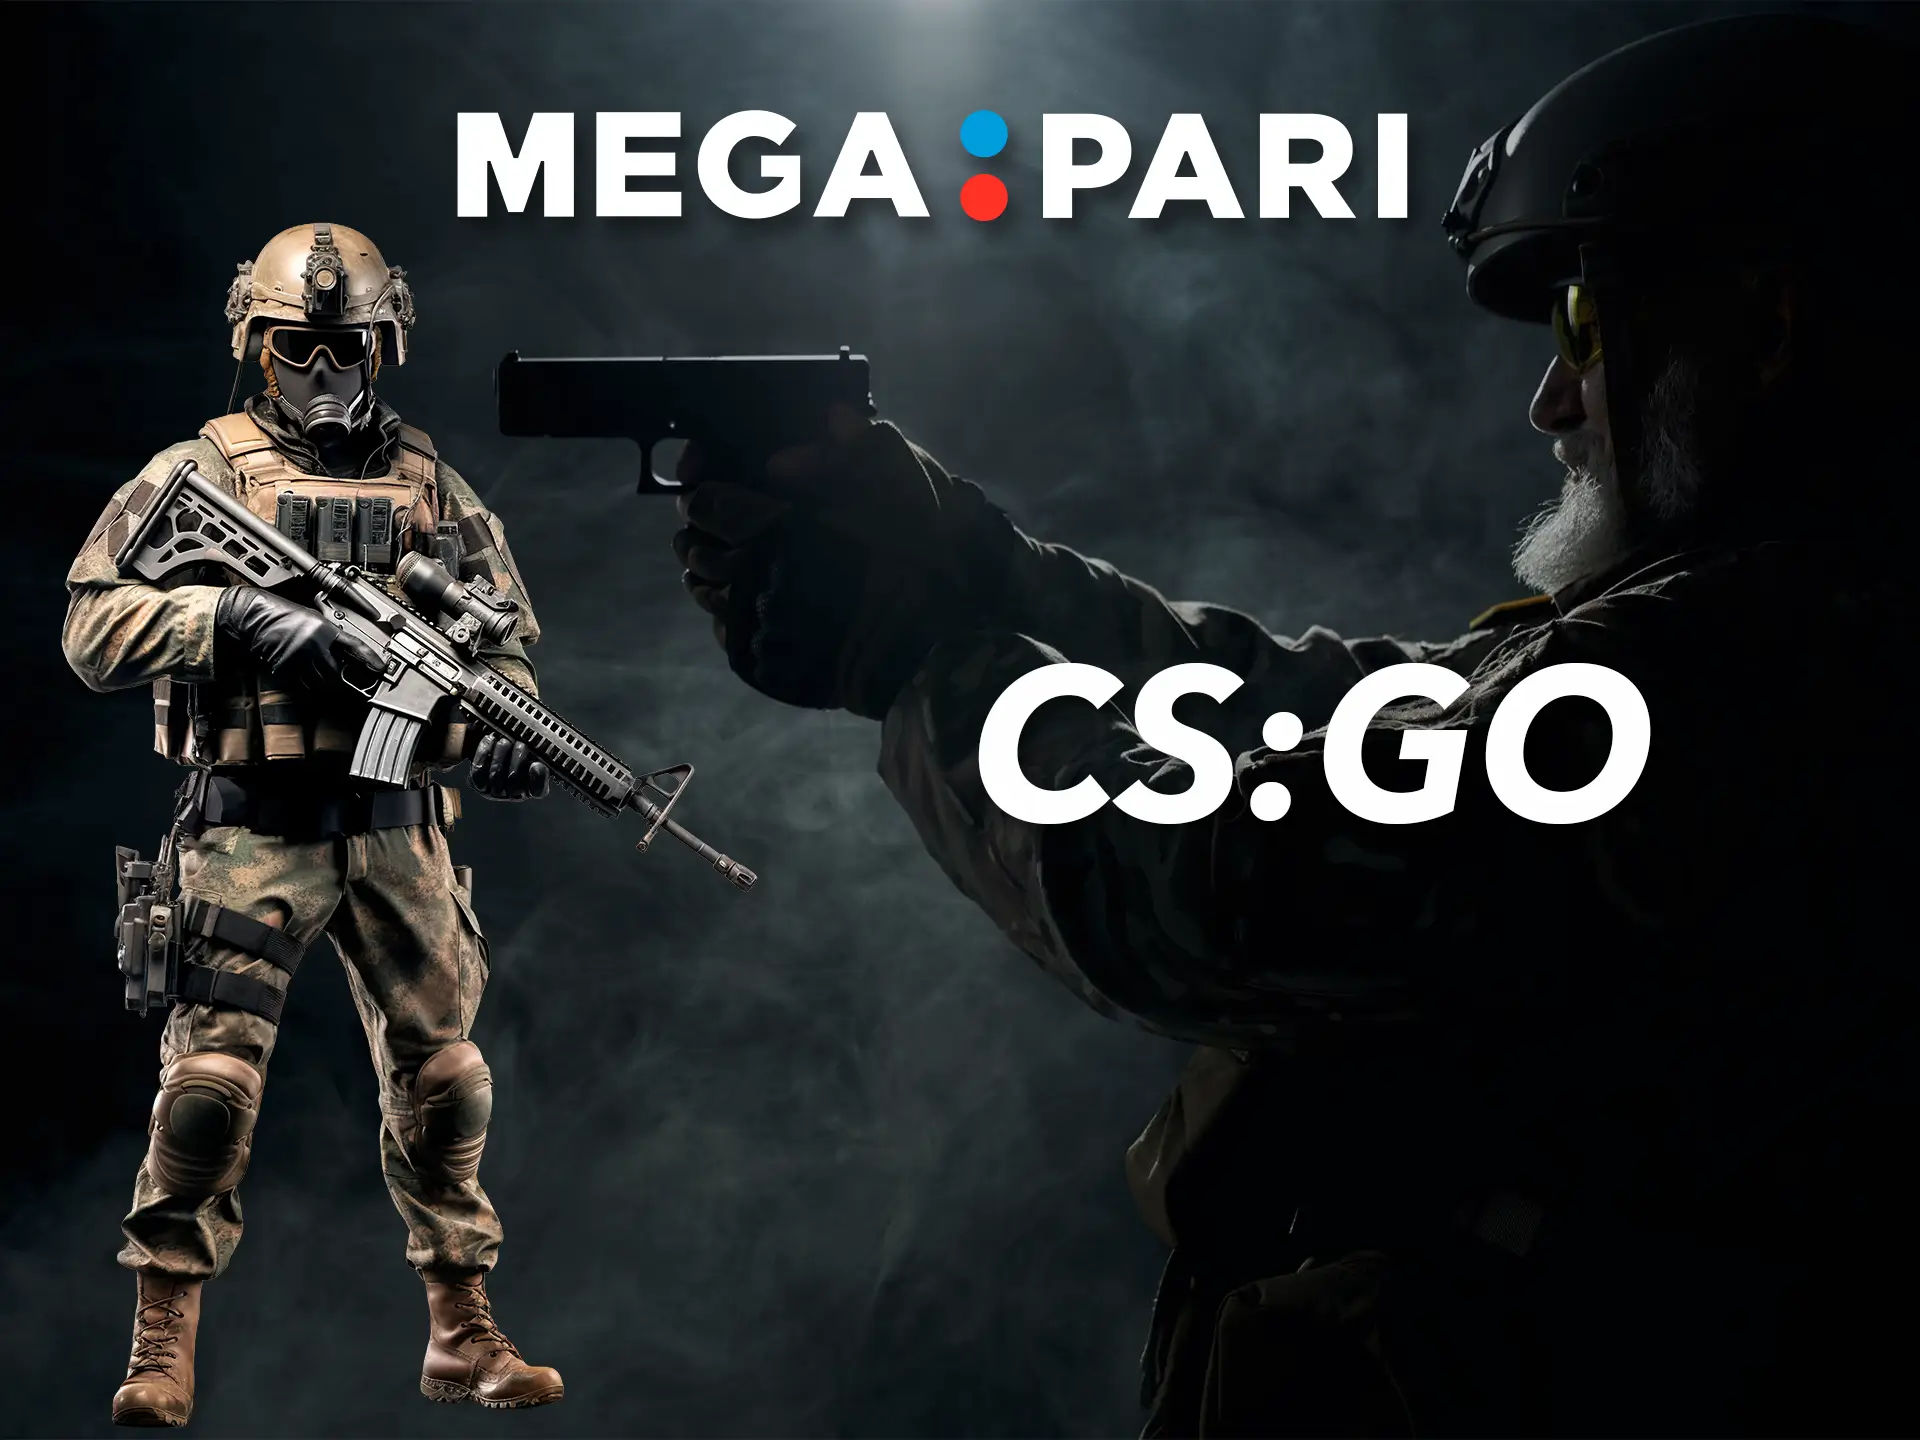 Get a boost of excitement from playing your favorites in the game CS:GO.